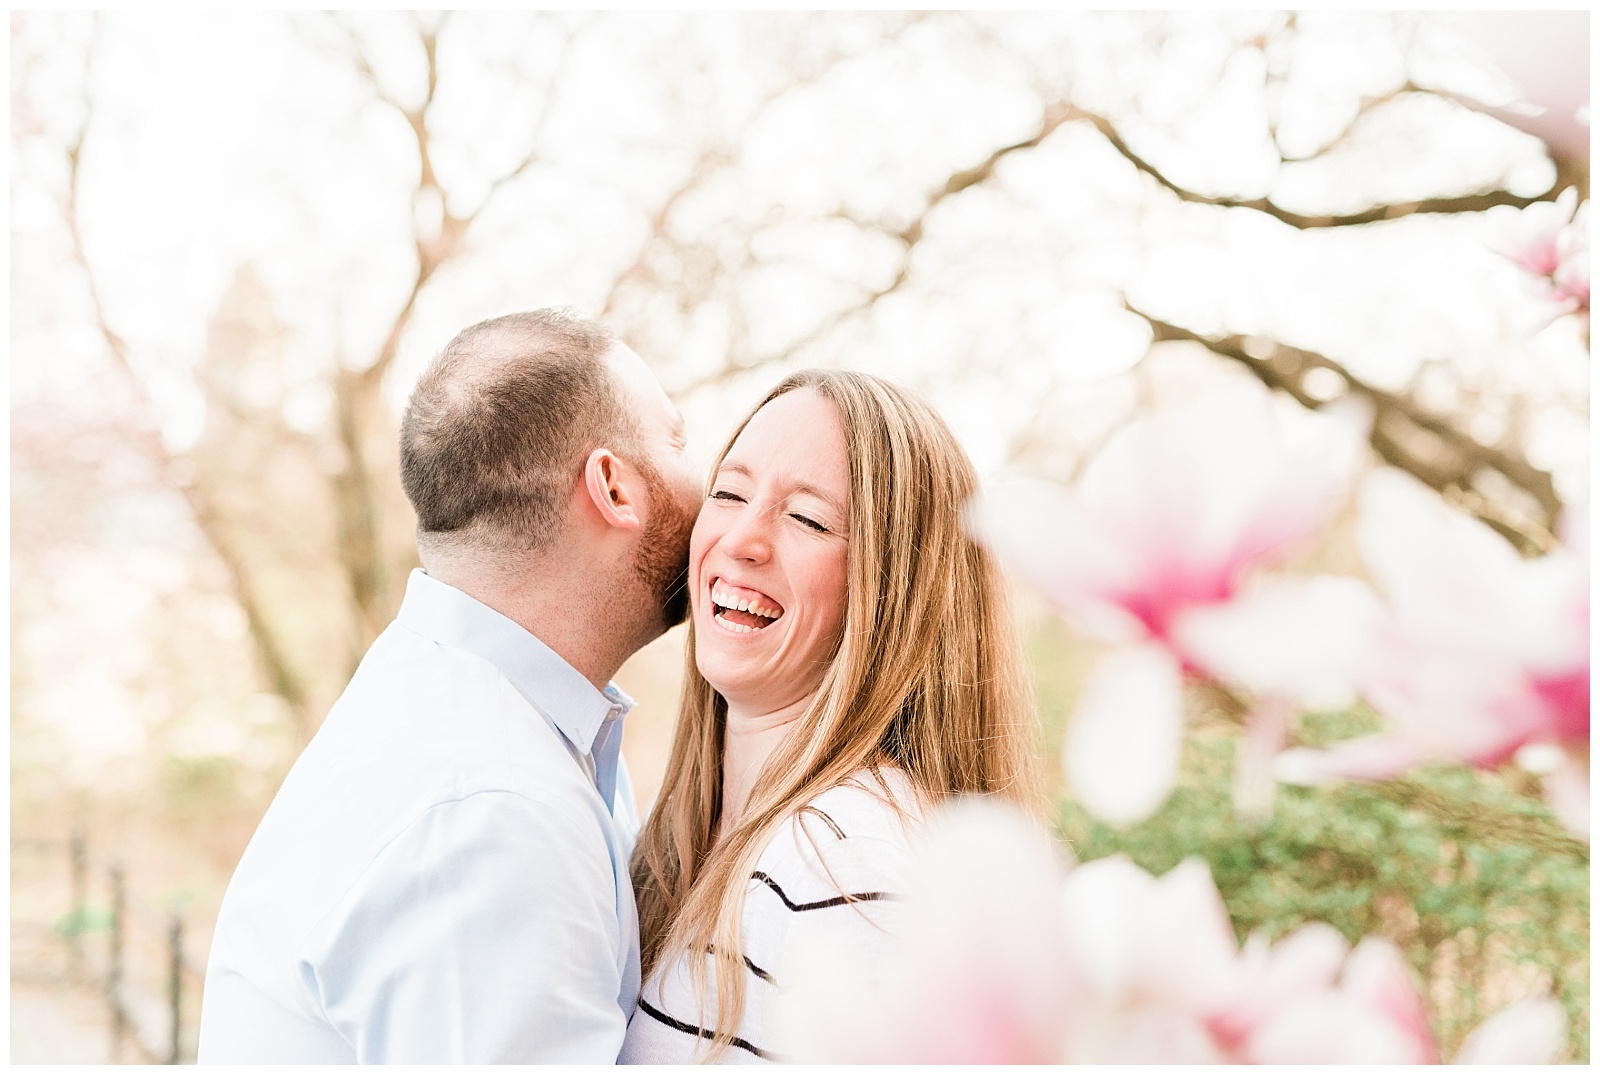 Central Park, NYC engagement session, springtime, wedding photographer, New York, laughing, flowers, blooming